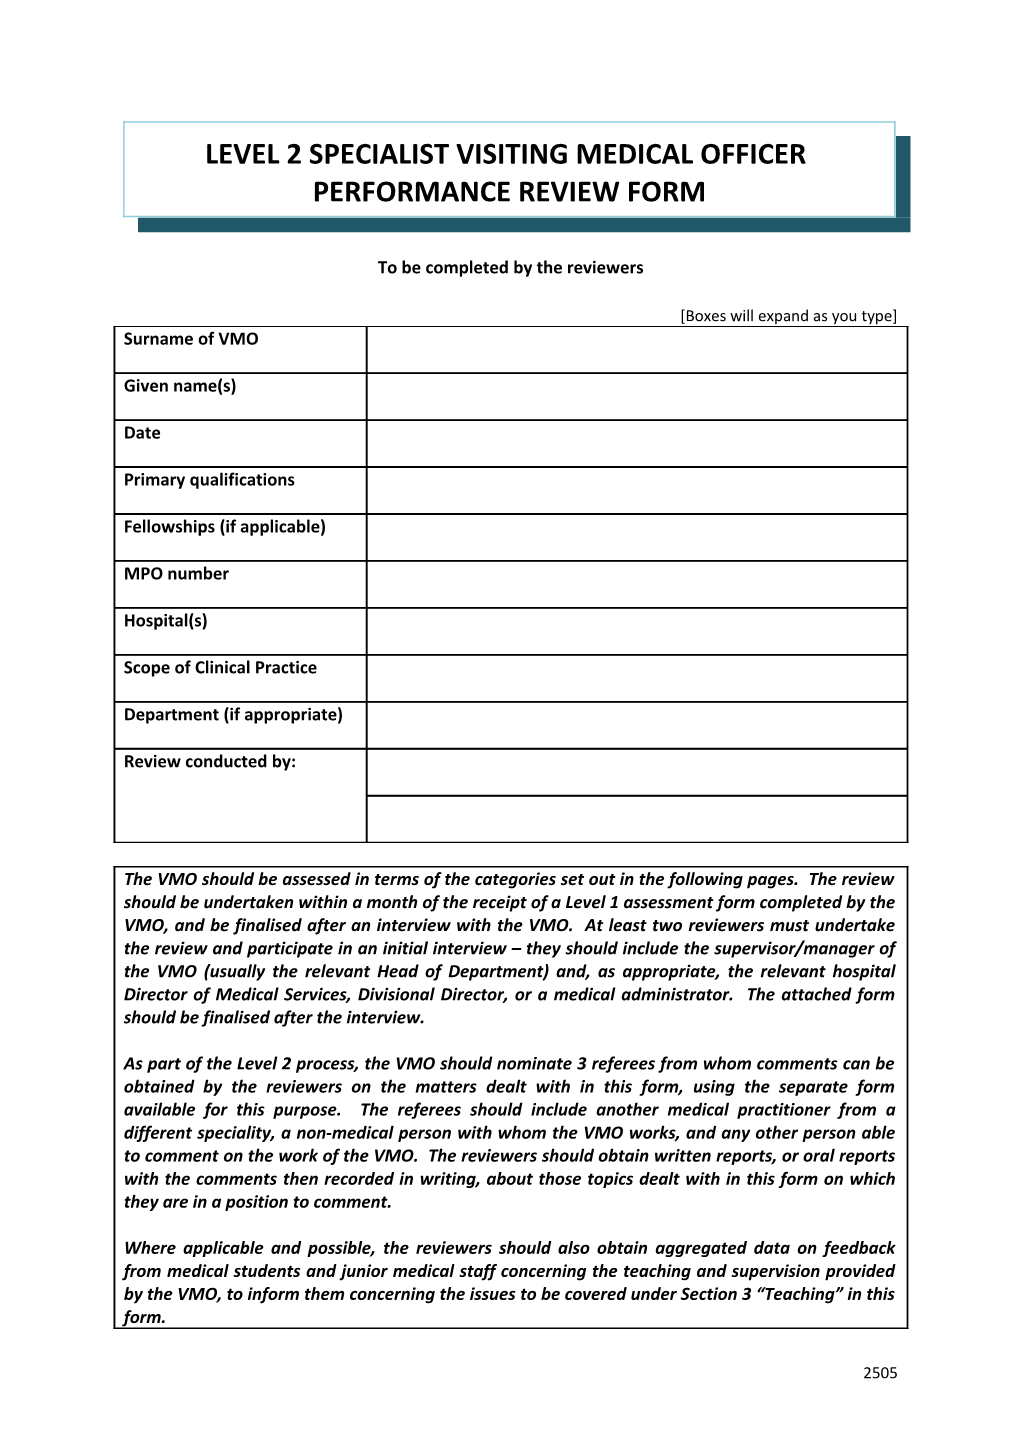 Level 2 Specialist Visiting Medical Officer Performance Review Form